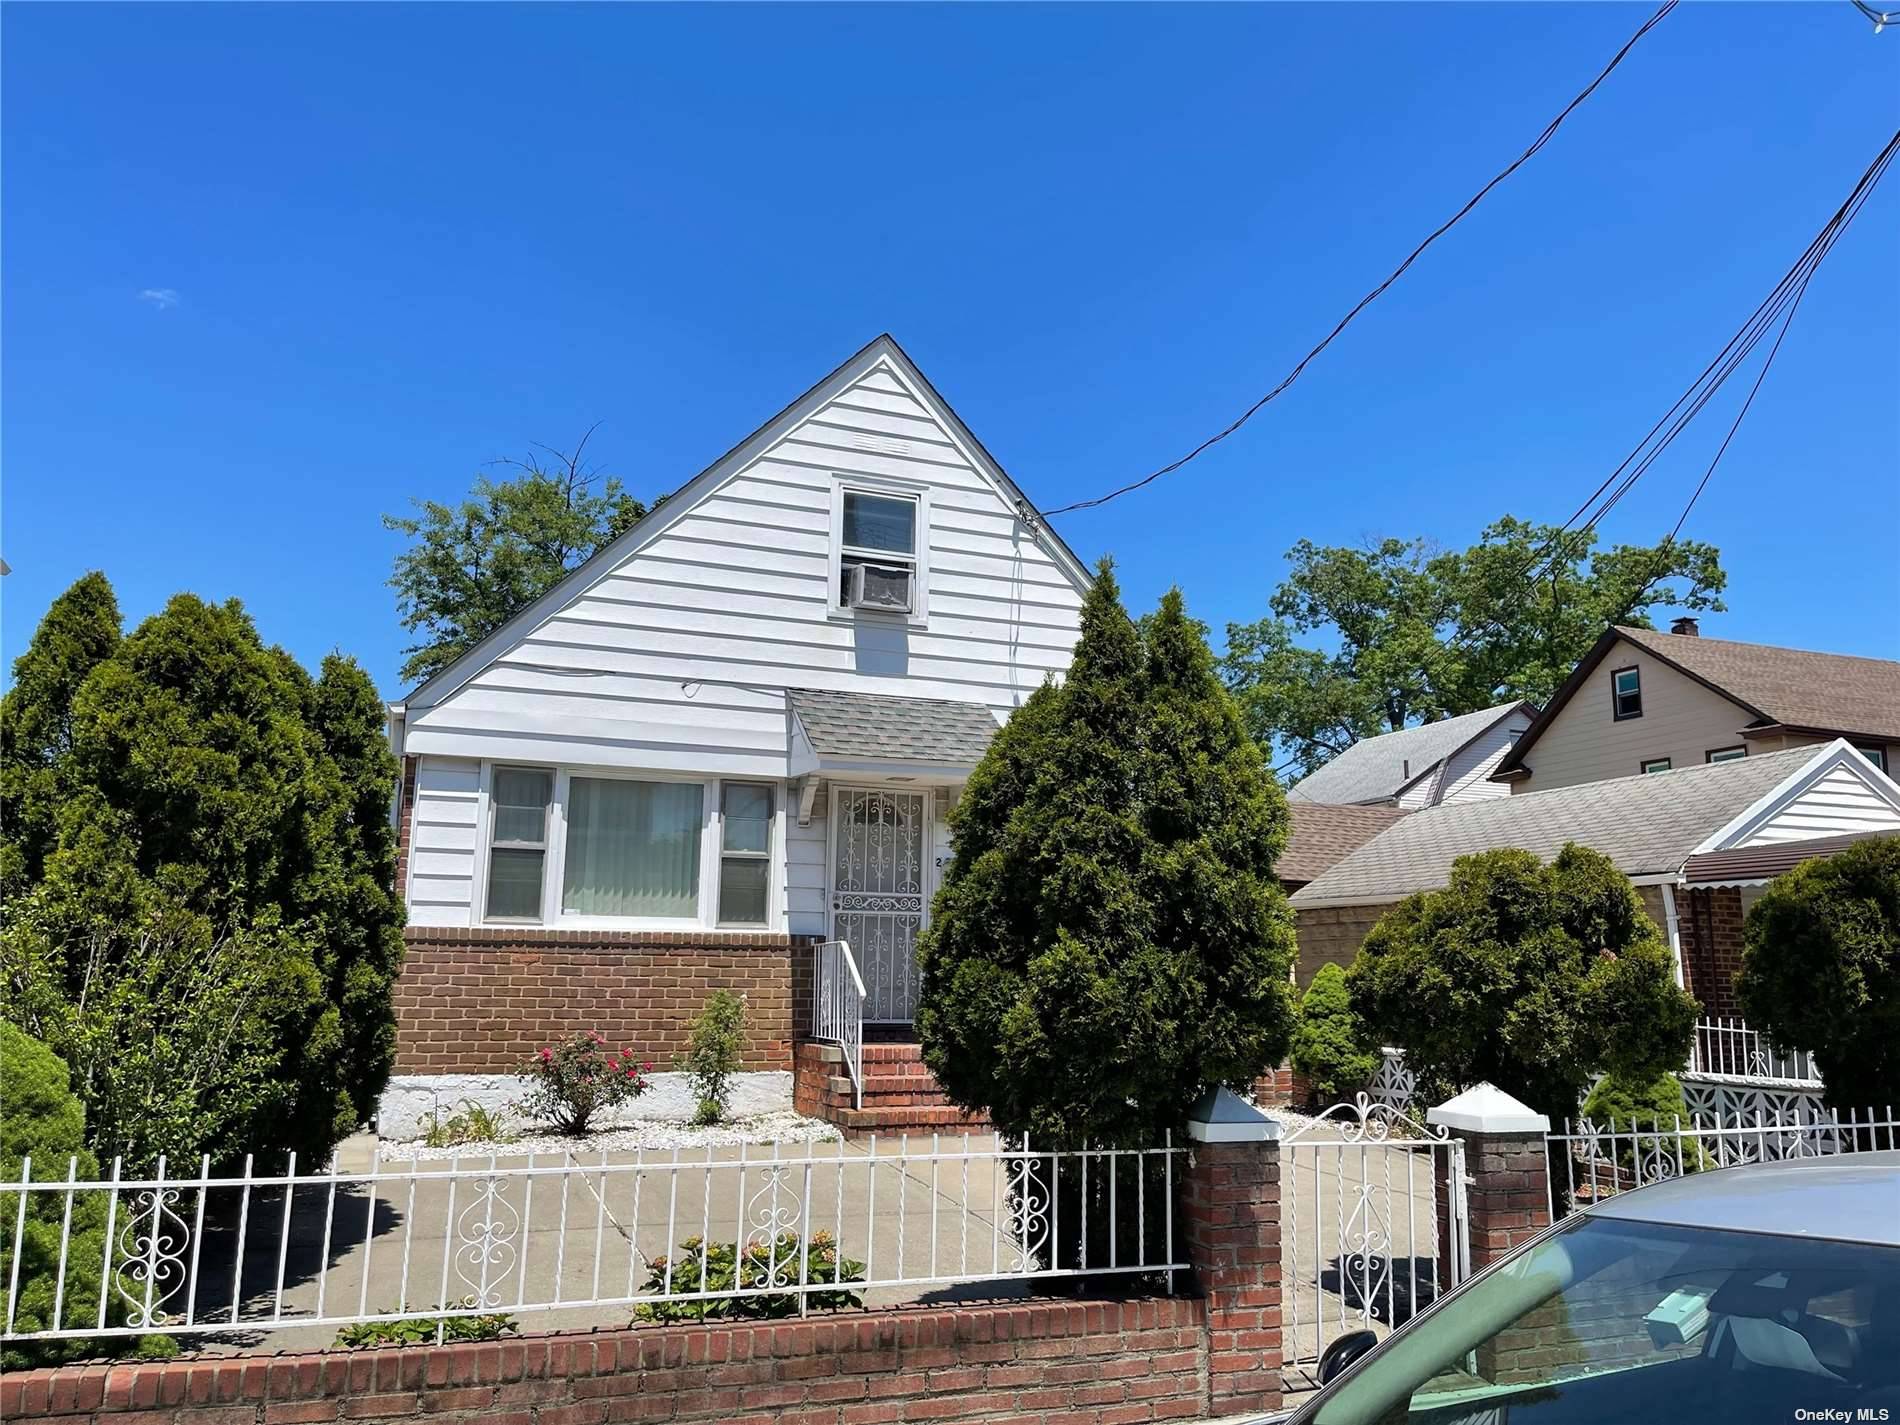 Legal 1 family cape cod being used as 2 in excellent condition in very desired area in Queens Village.